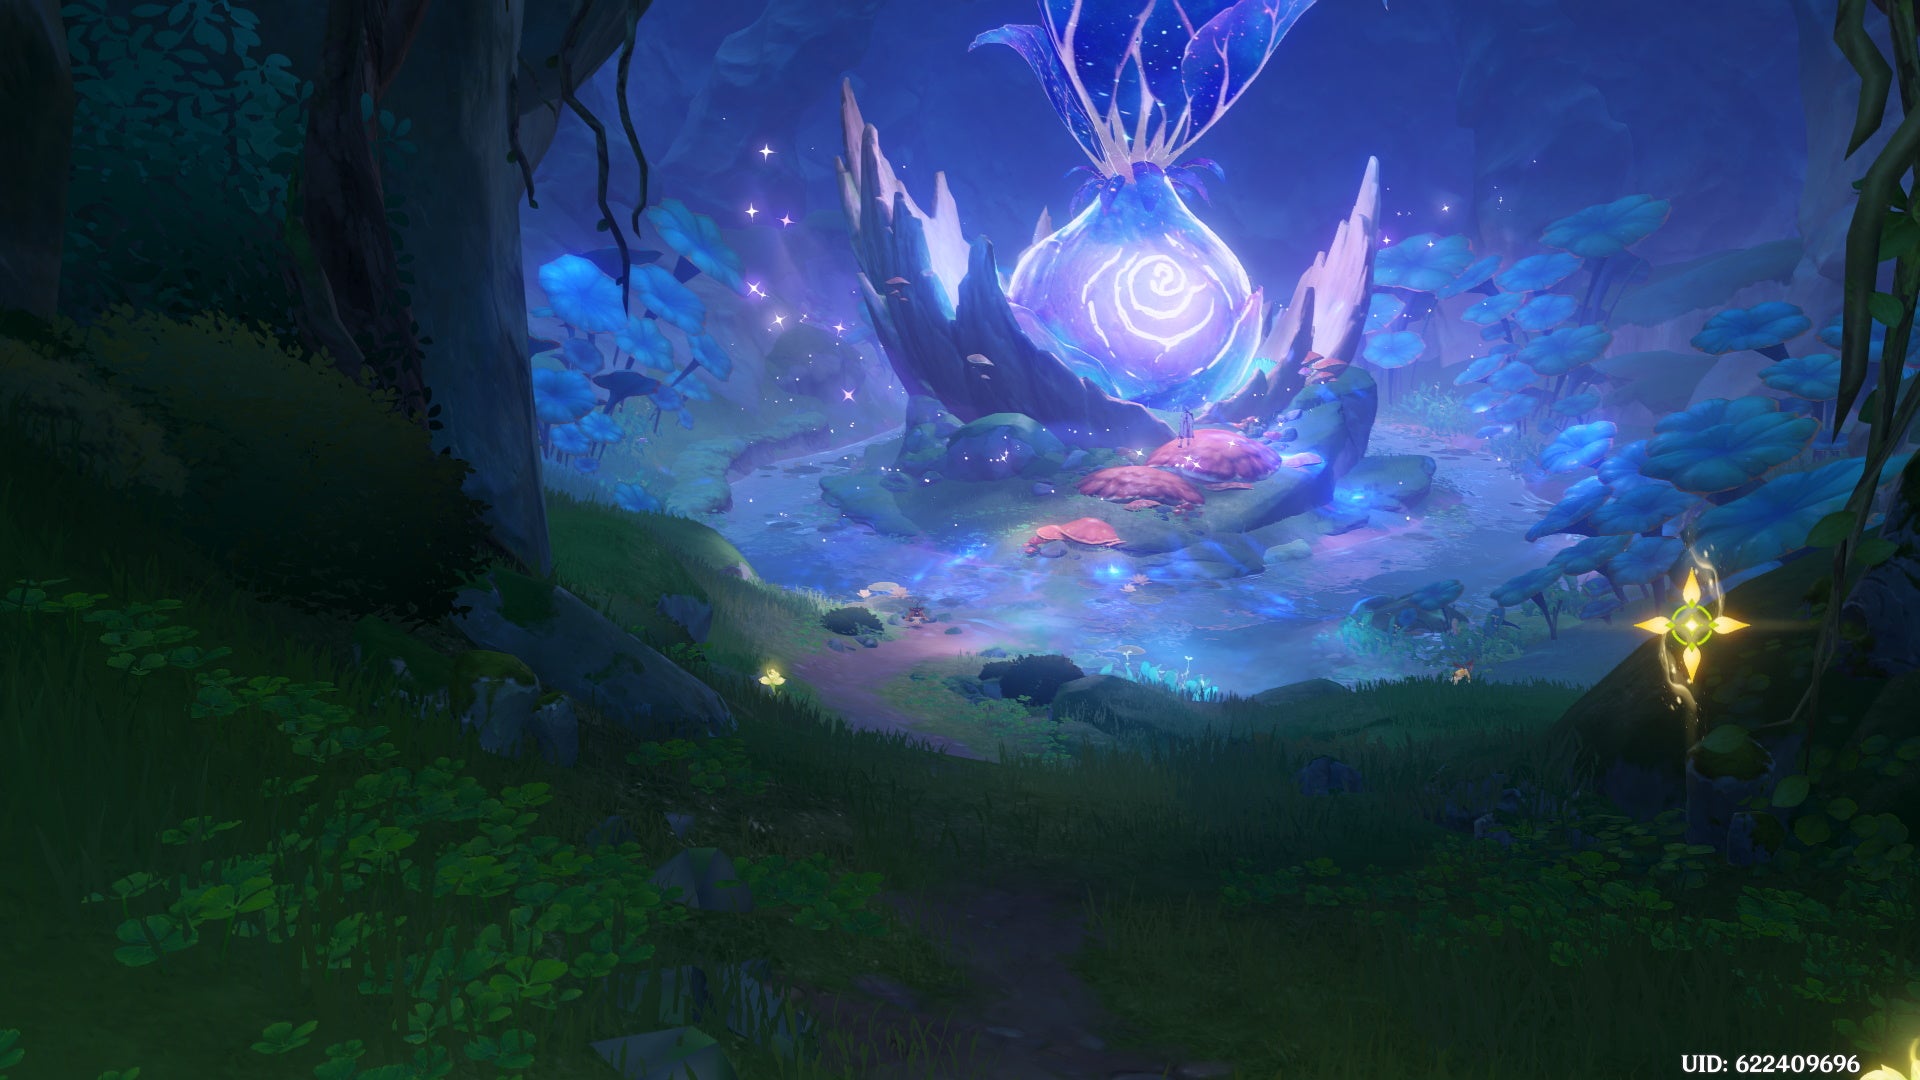 Genshin Impact Tree of Dreams: A glowing blue onion is situated in the middle of a pond